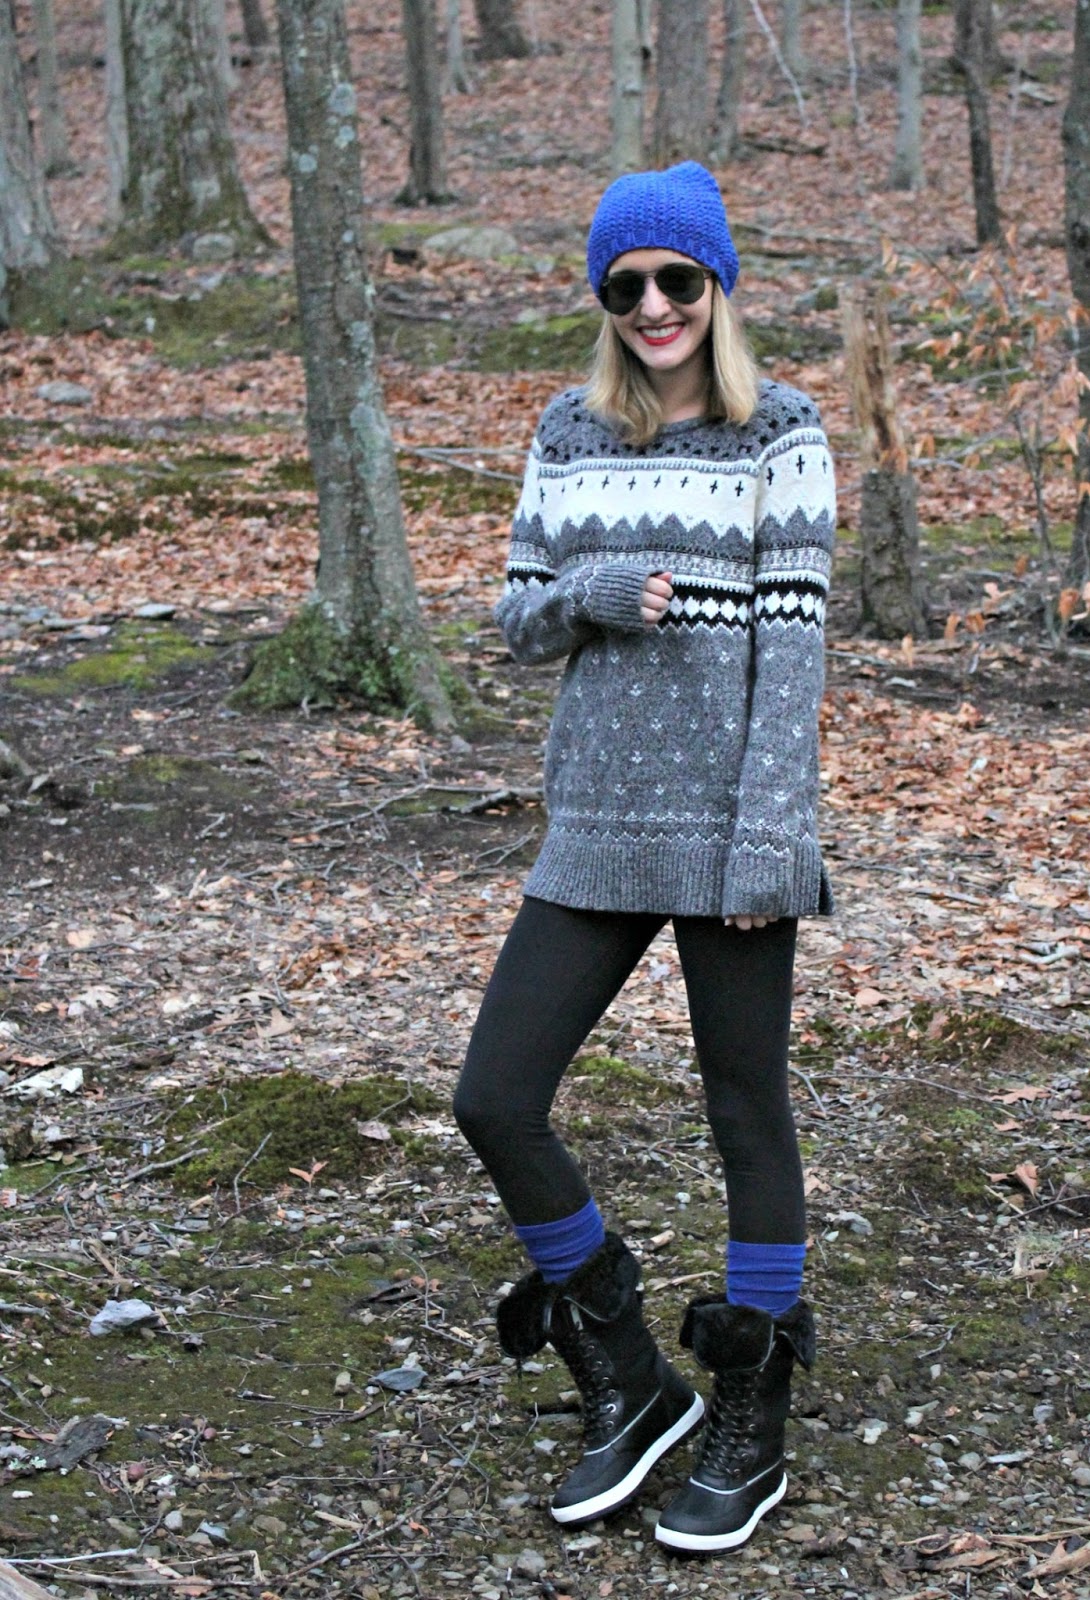 A smiling woman in a patterned sweater, black leggings, and winter boots with blue socks, wearing a blue beanie and sunglasses in a forest setting.